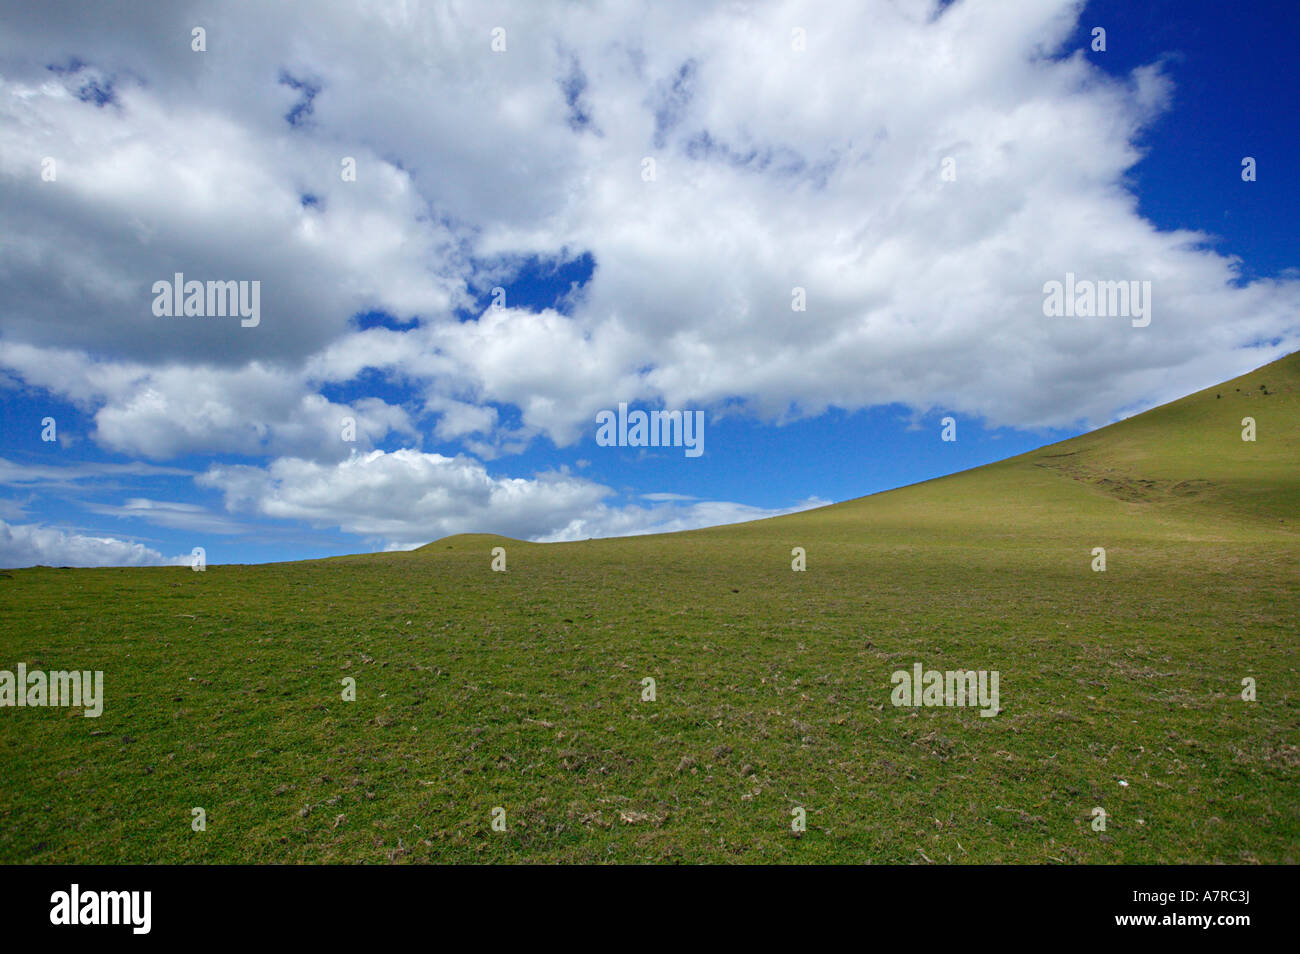 Transkei scenery with a green grassland and crisp white clouds Transkei Eastern Cape South Africa Stock Photo